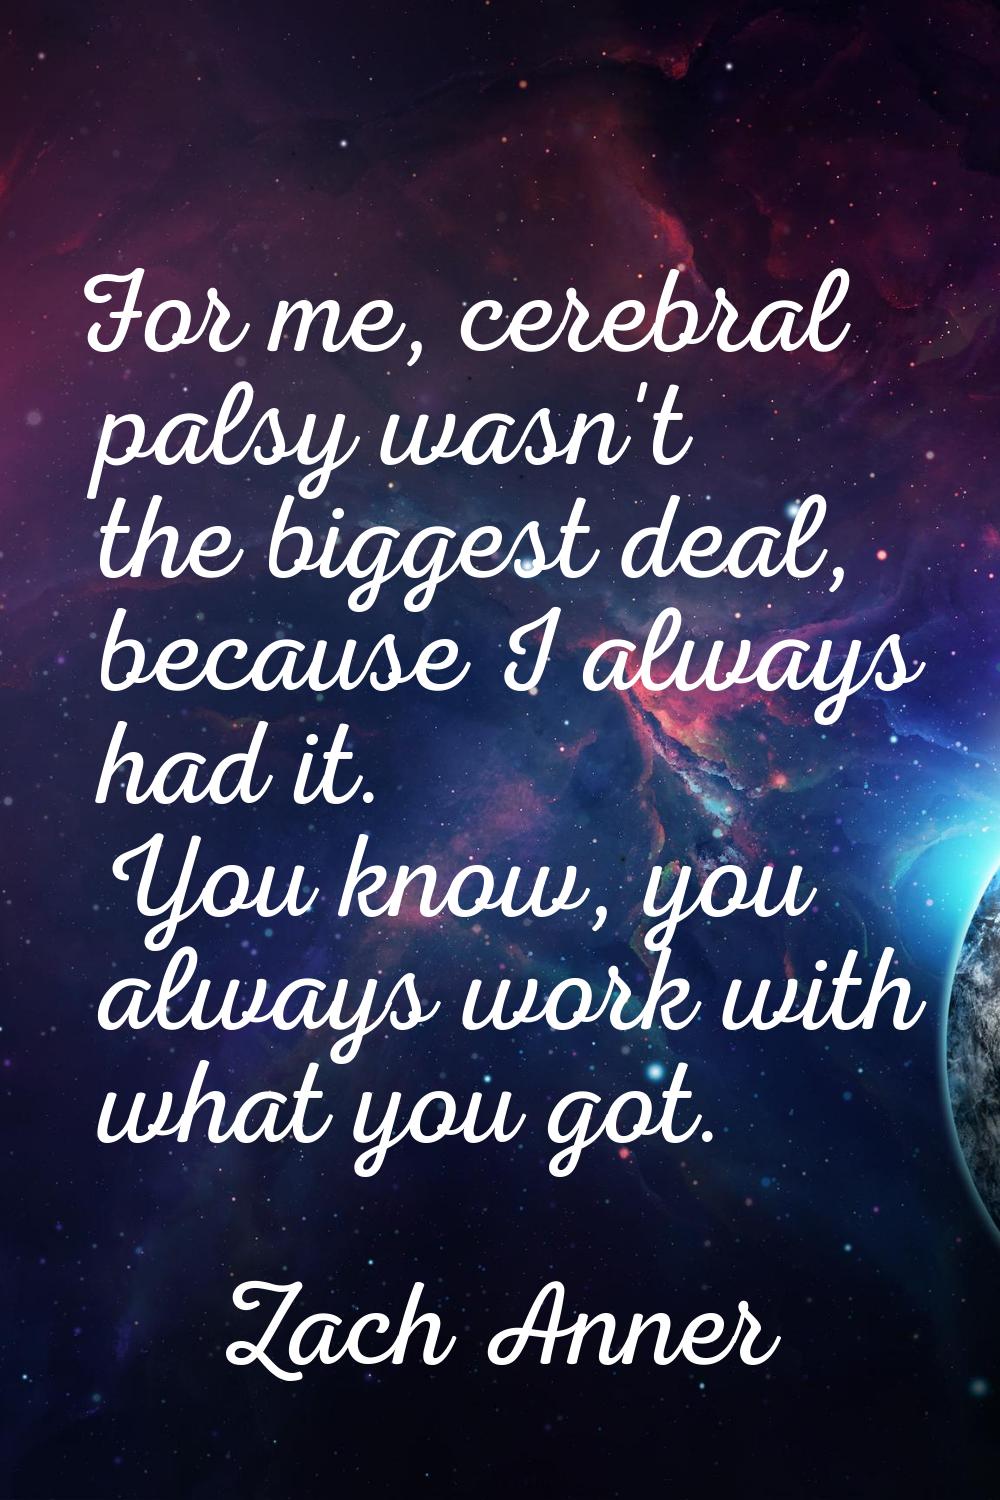 For me, cerebral palsy wasn't the biggest deal, because I always had it. You know, you always work 